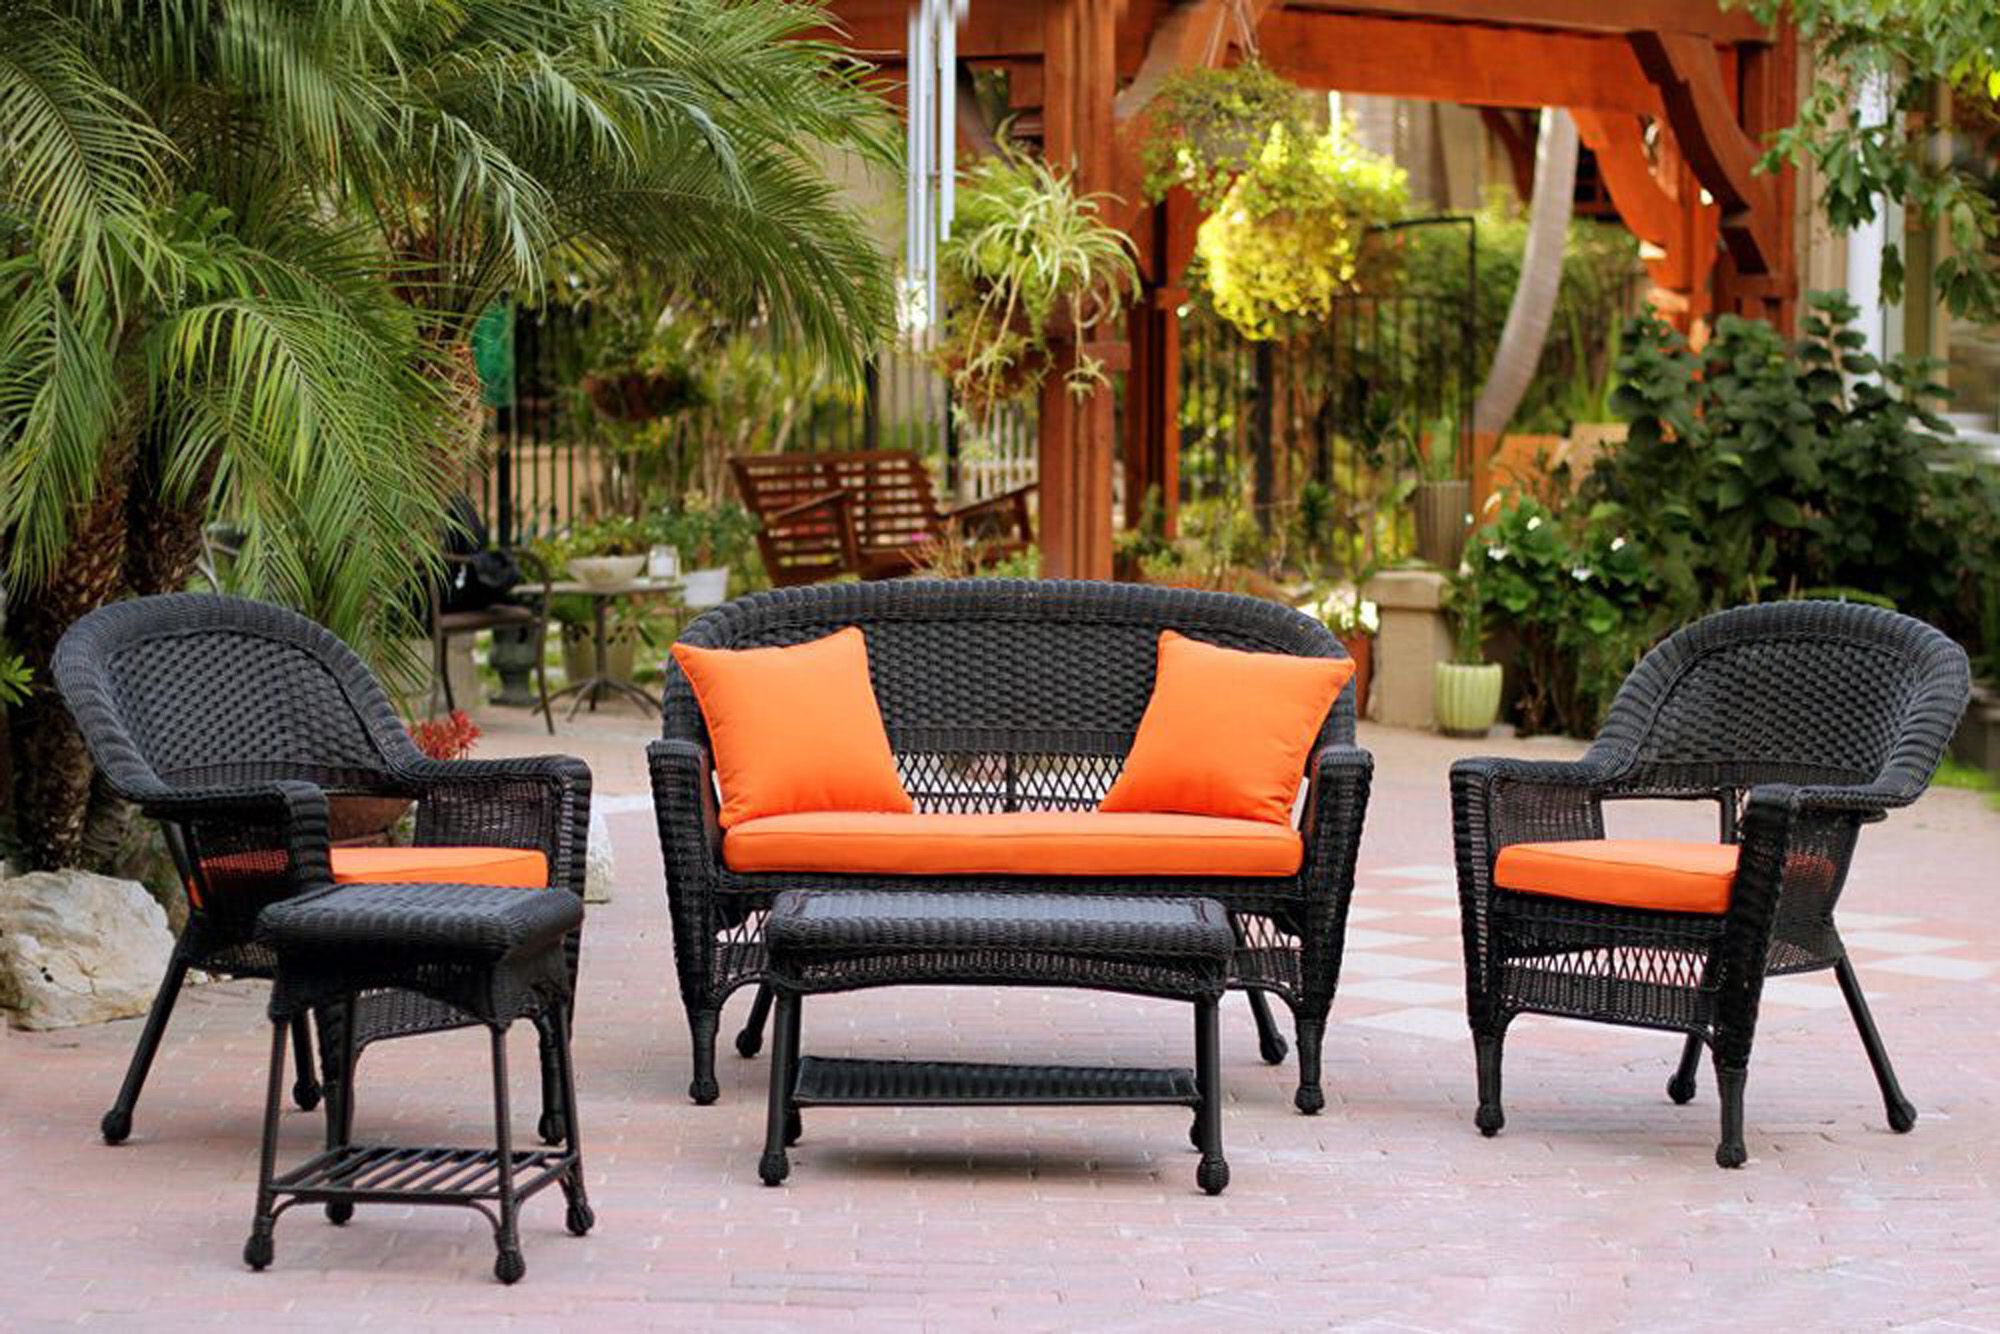 Outdoor Wicker Orange Cushion Patio Sets Within Most Popular 5 Piece Black Resin Wicker Patio Chair, Loveseat & Table Furniture Set (View 9 of 15)